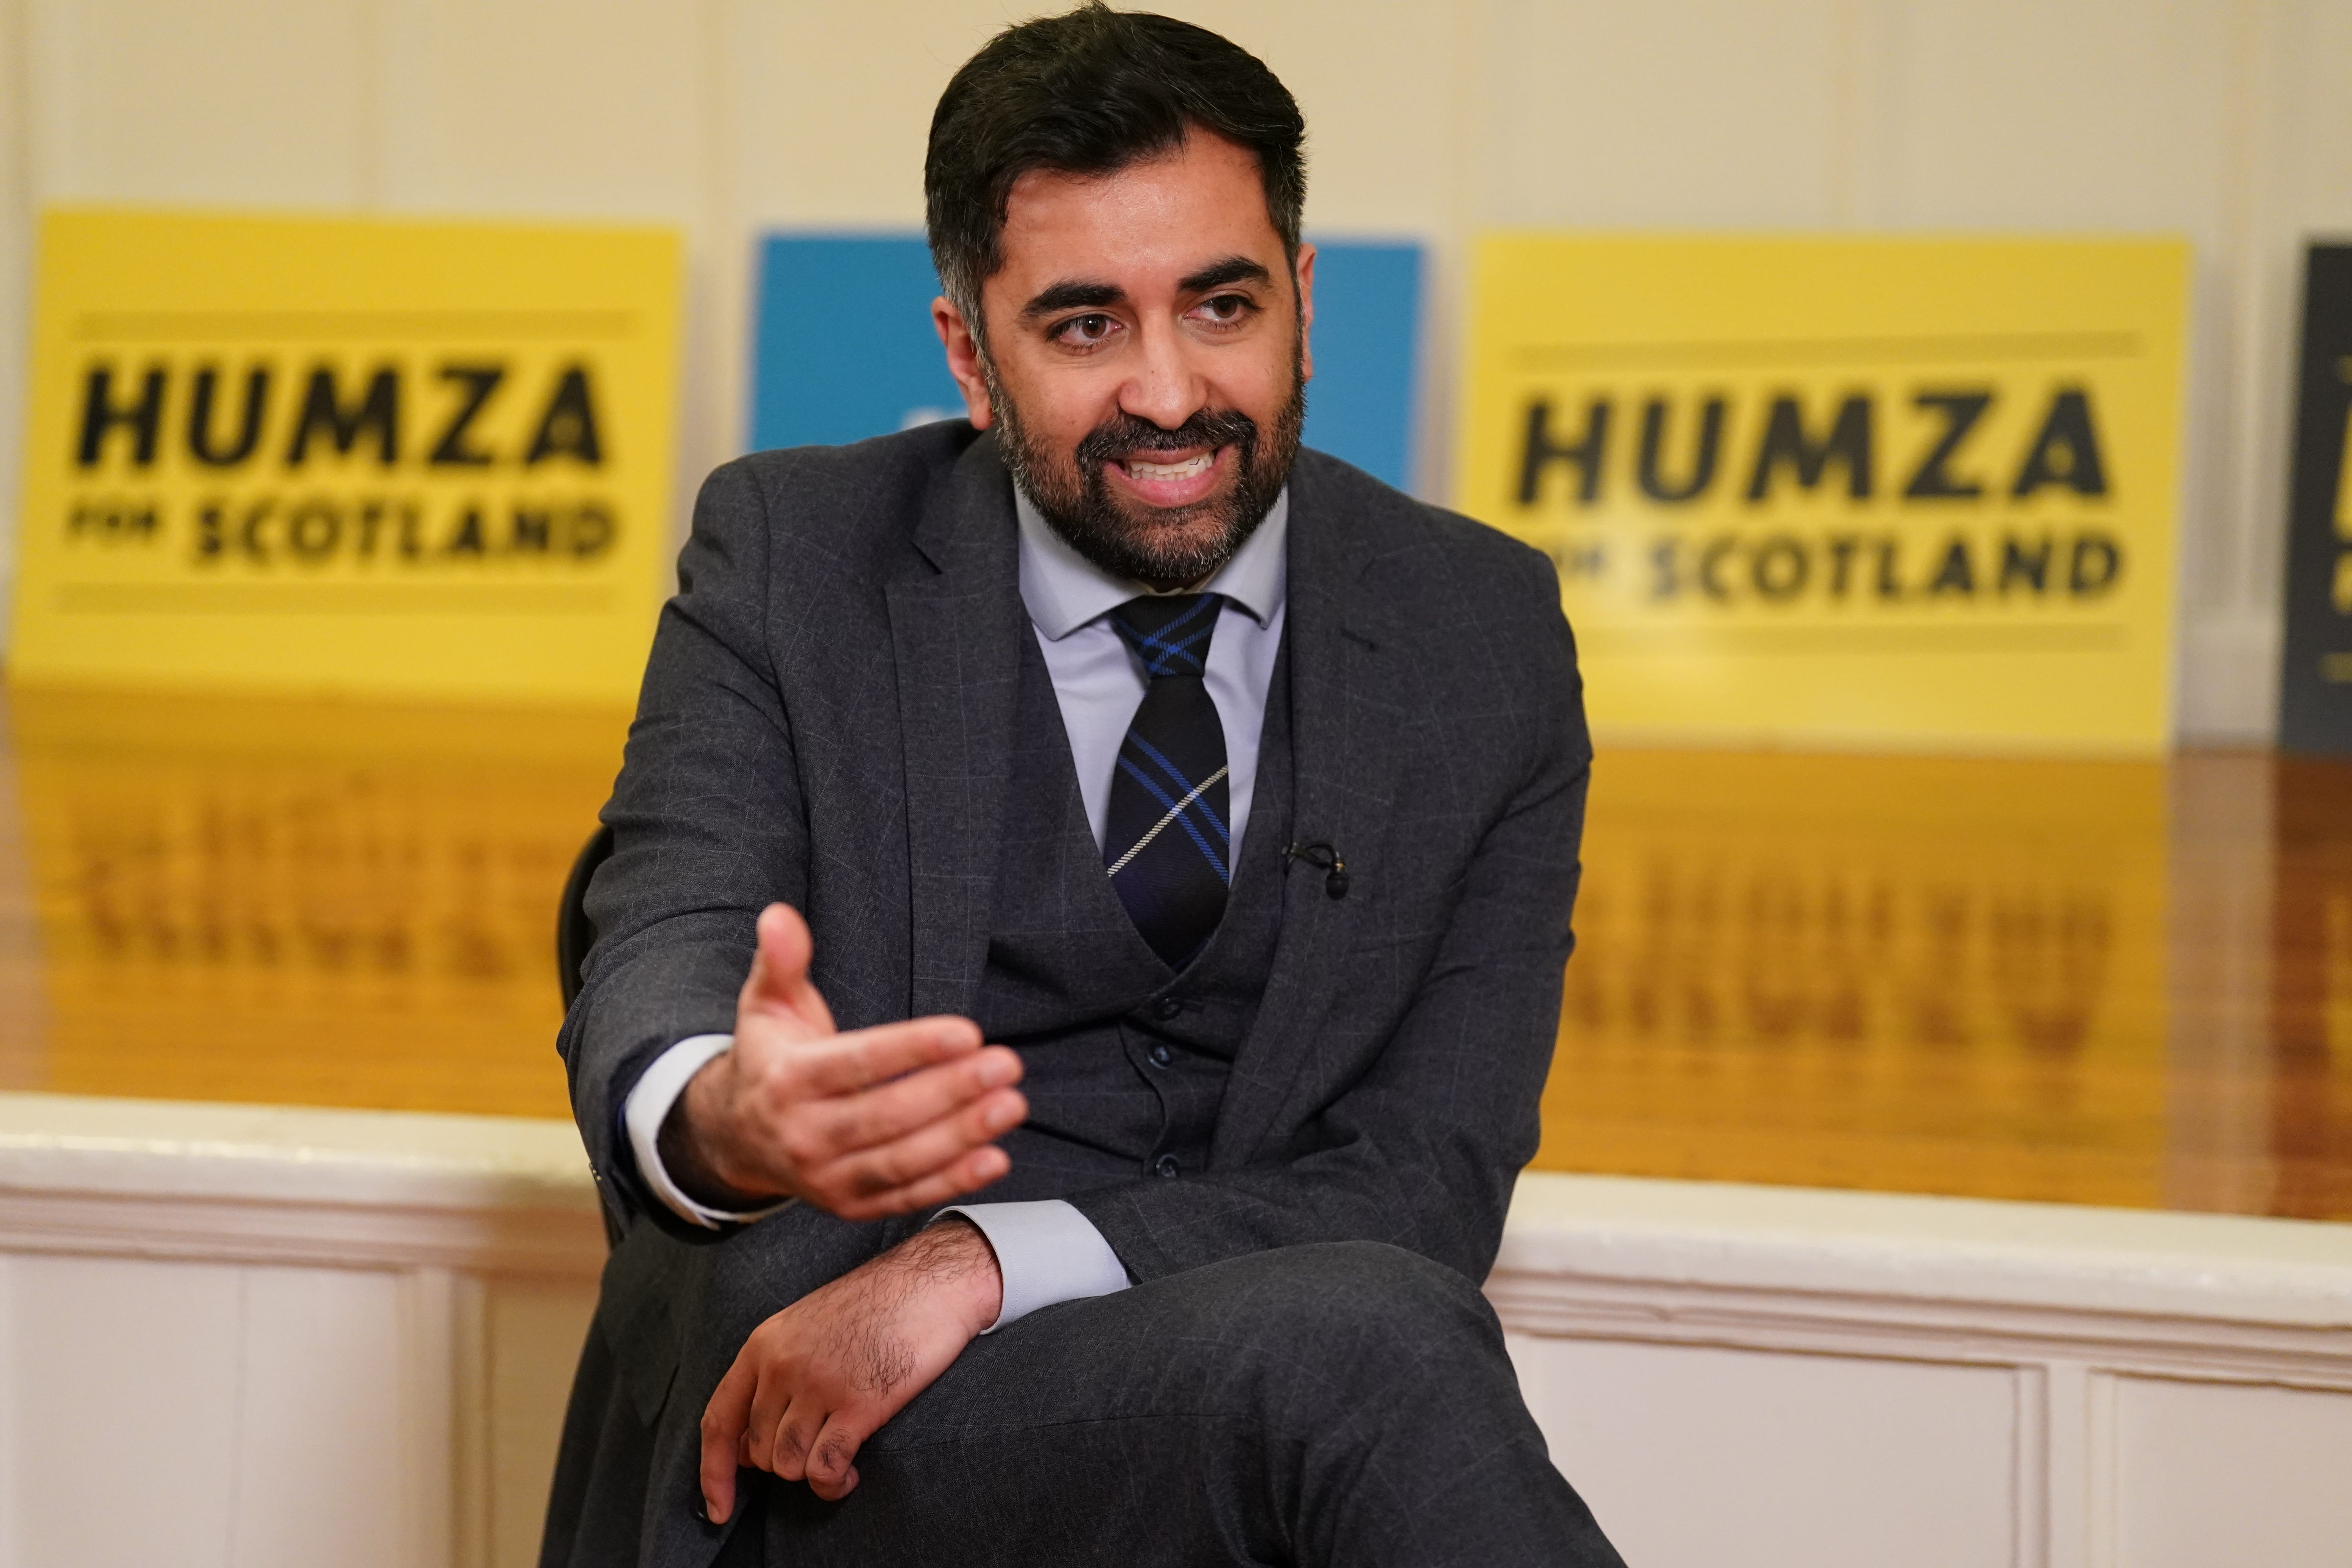 Humza Yousaf will meet party members in Dundee (Andrew Milligan/PA)